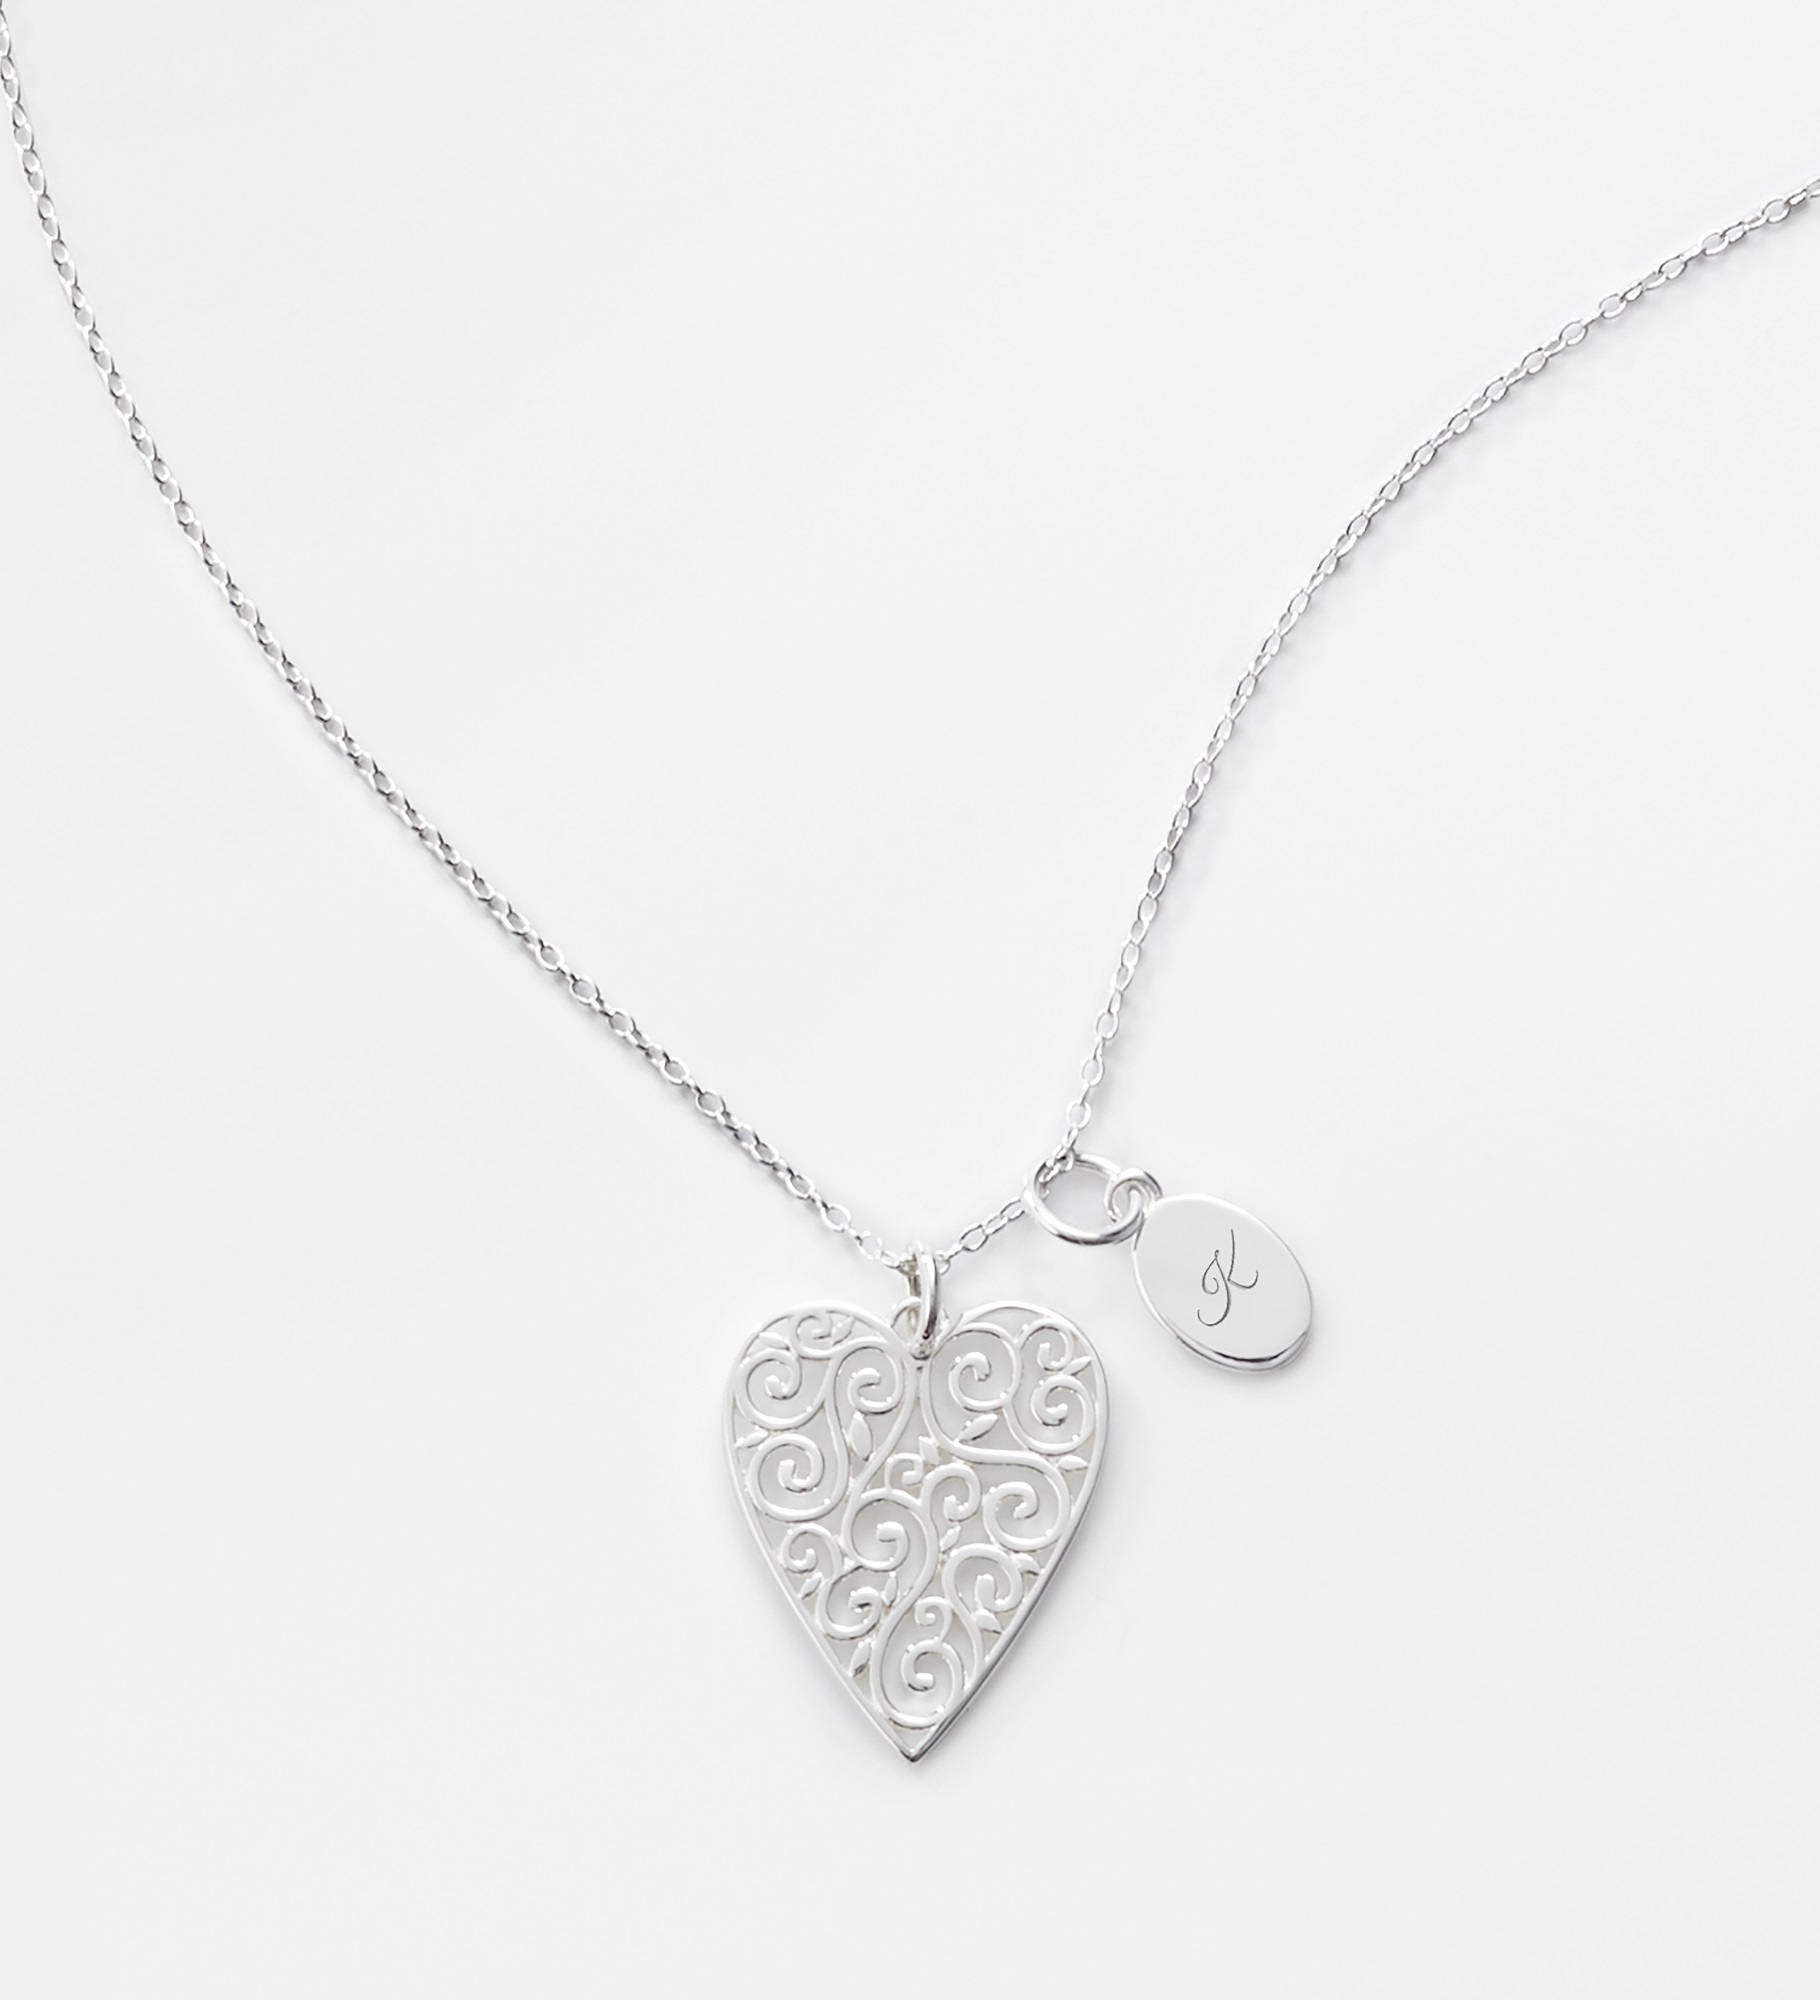  Engraved Sterling Silver Filigree Heart Necklace